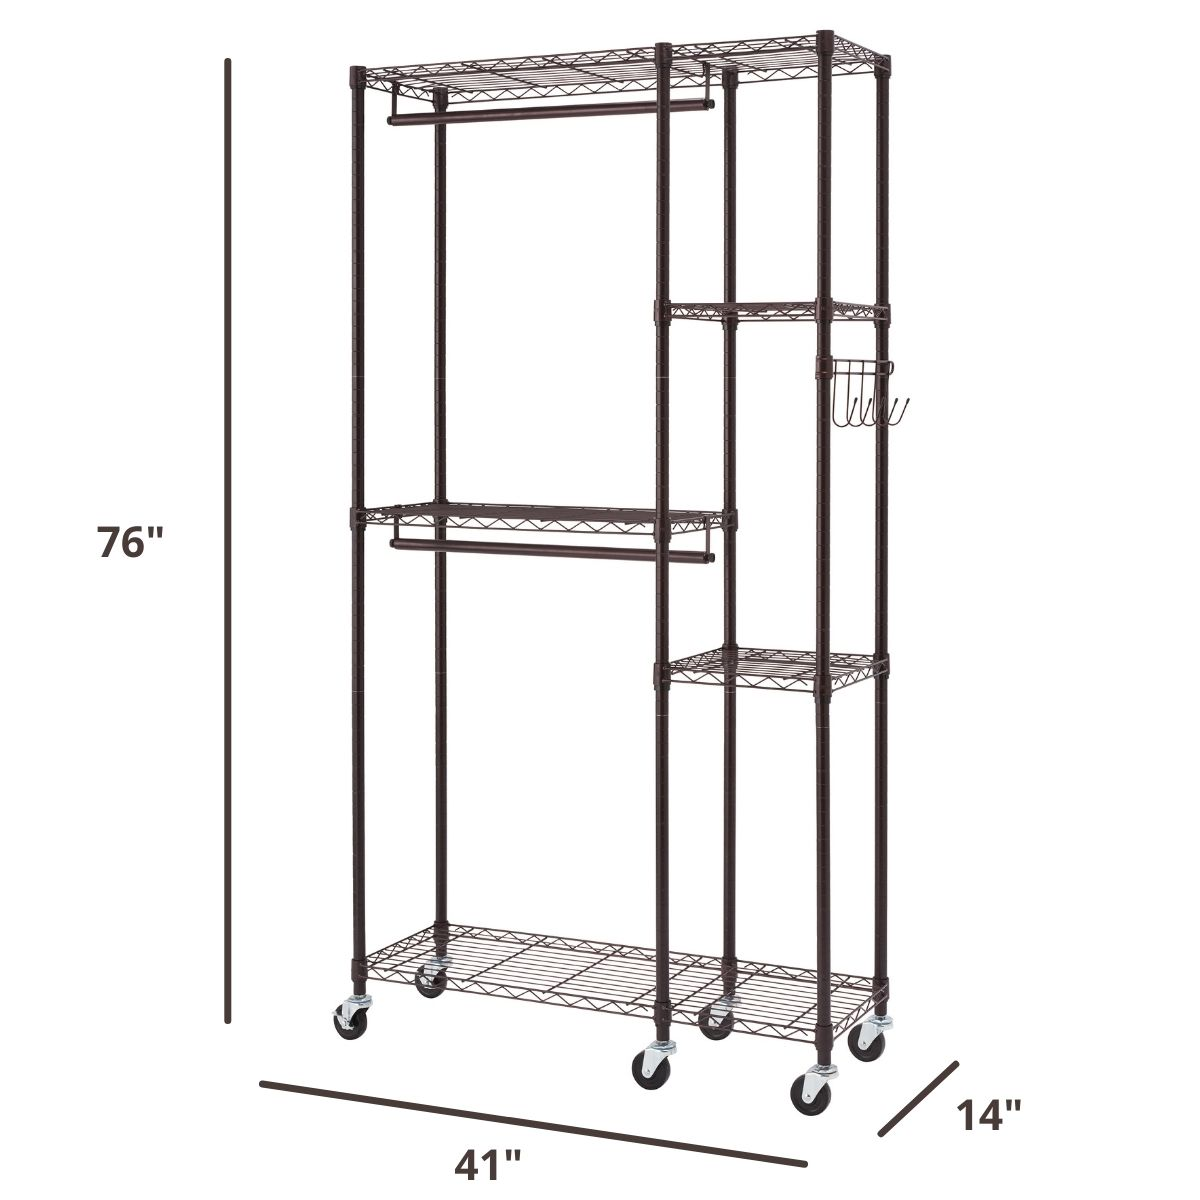 76 inches tall rolling garment rack